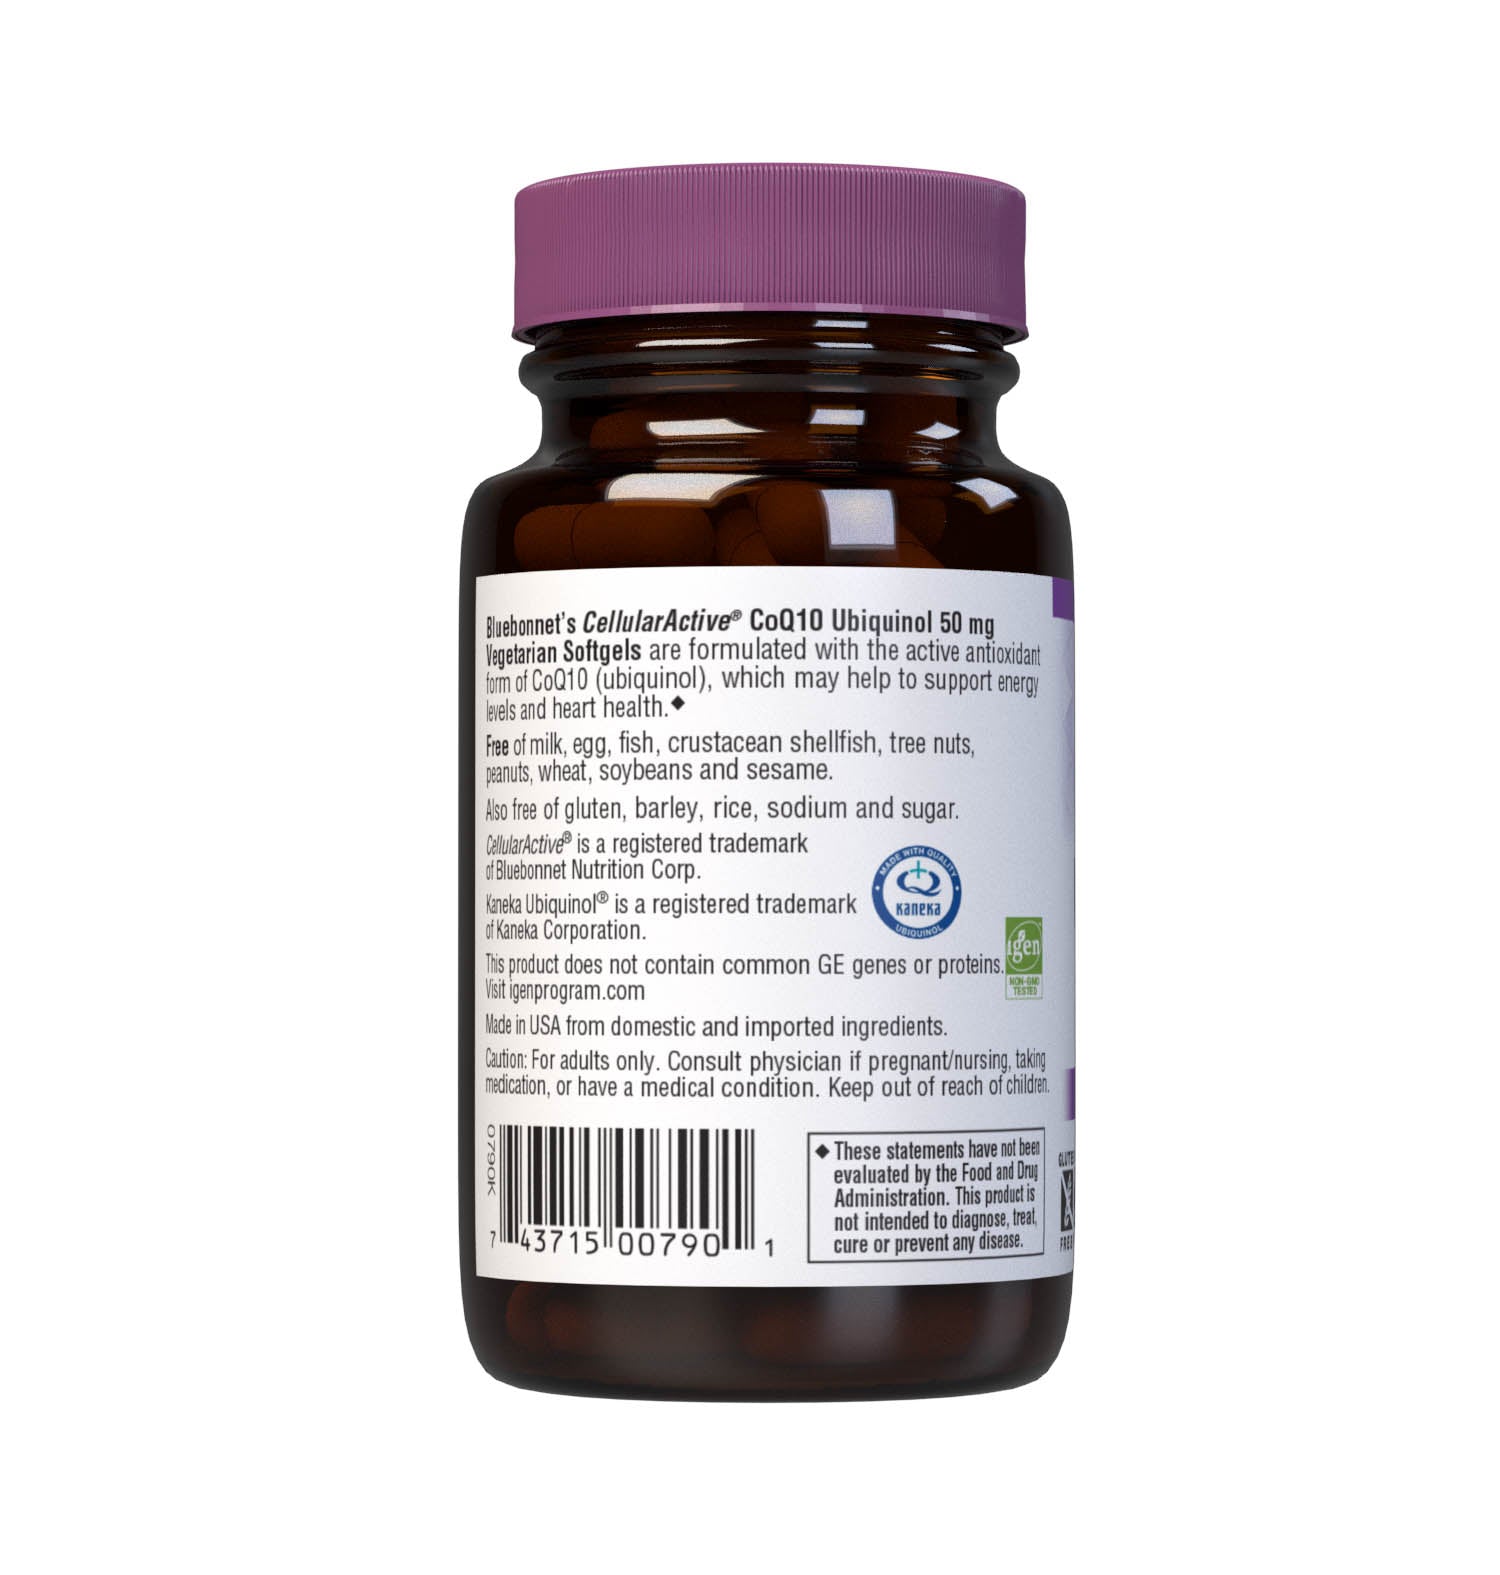 Bluebonnet’s Cellular Active CoQ10 Ubiquinol 30 Vegetarian Softgels are formulated with 50 mg of the active antioxidant form of CoQ10 (ubiquinol), which may support energy levels and heart health. Description panel. #size_30 count